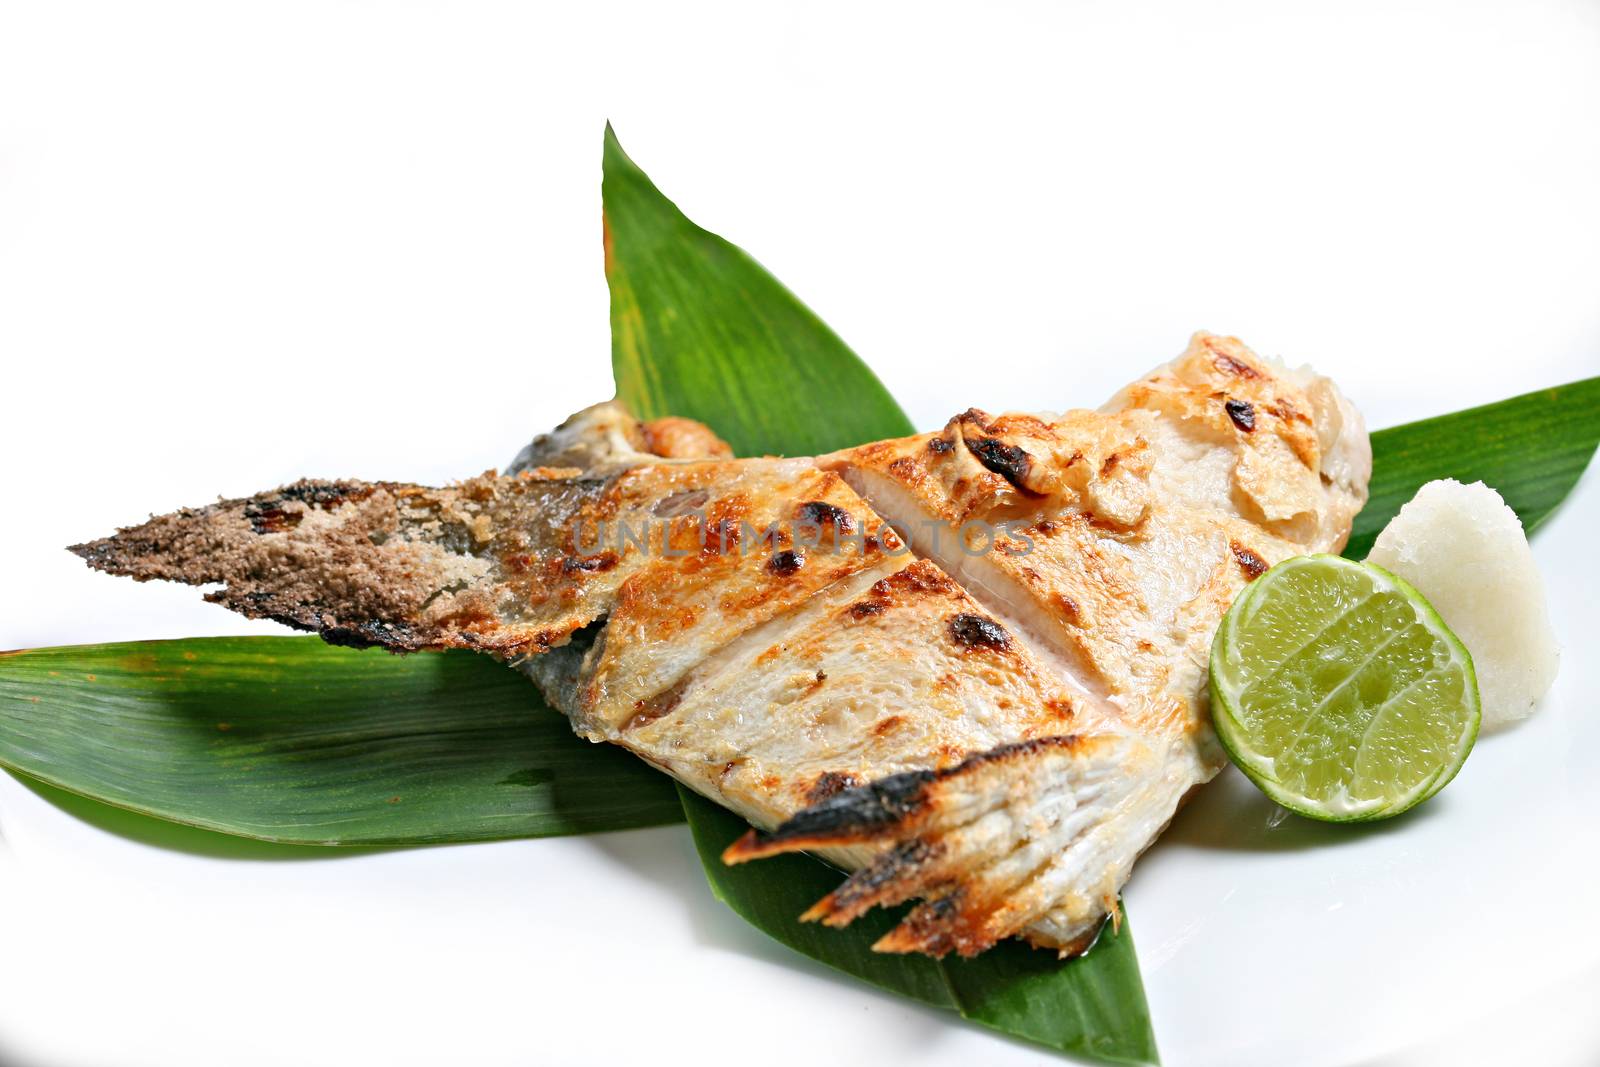 Charcoal Grilled Hamachi kama, Japanese Food Style served with lemon in white background